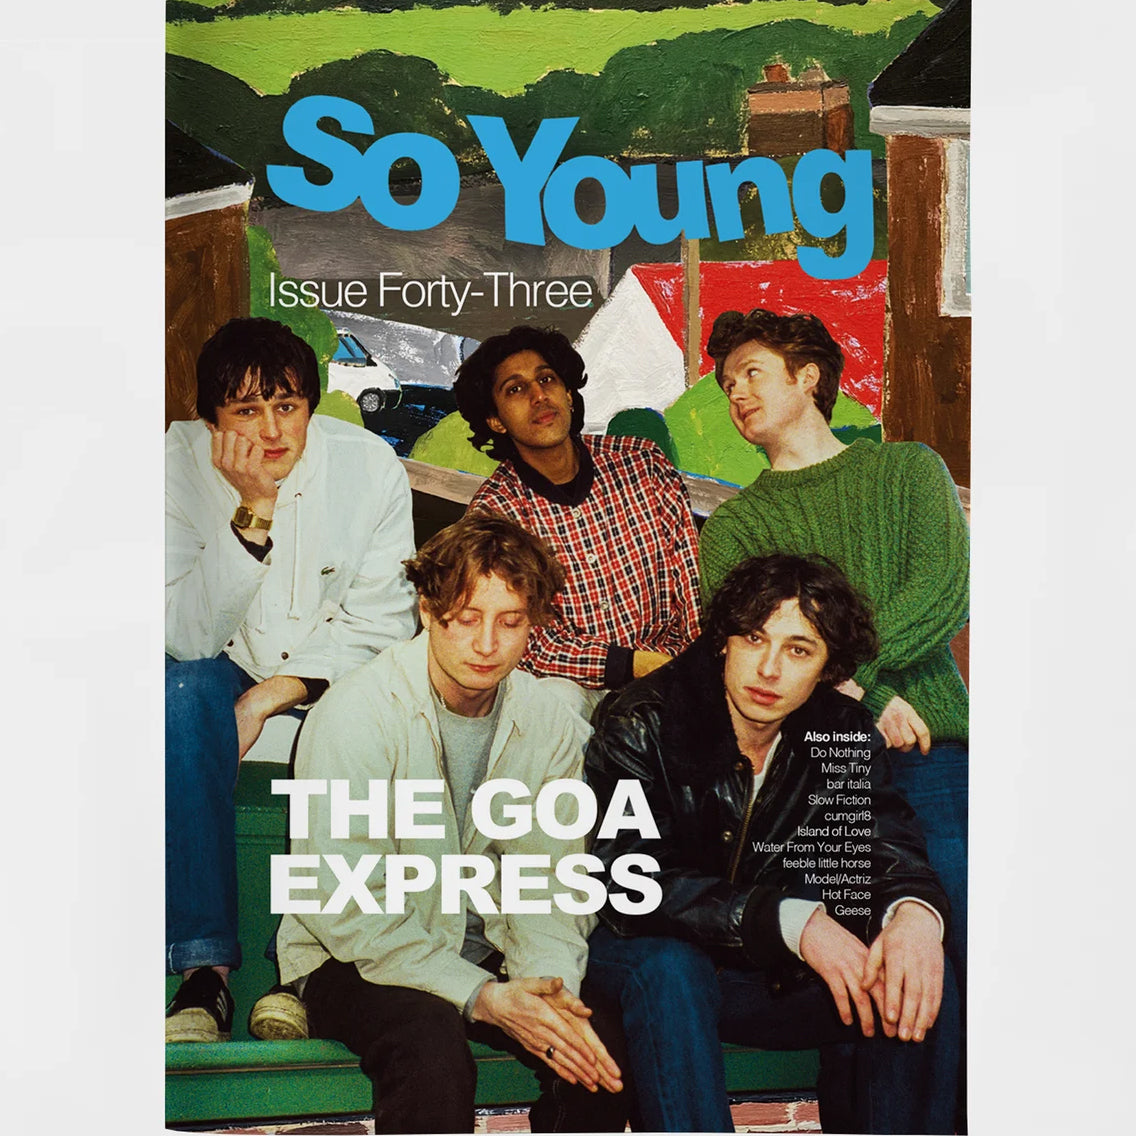 SO YOUNG MAGAZINE 'ISSUE FORTY-THREE'